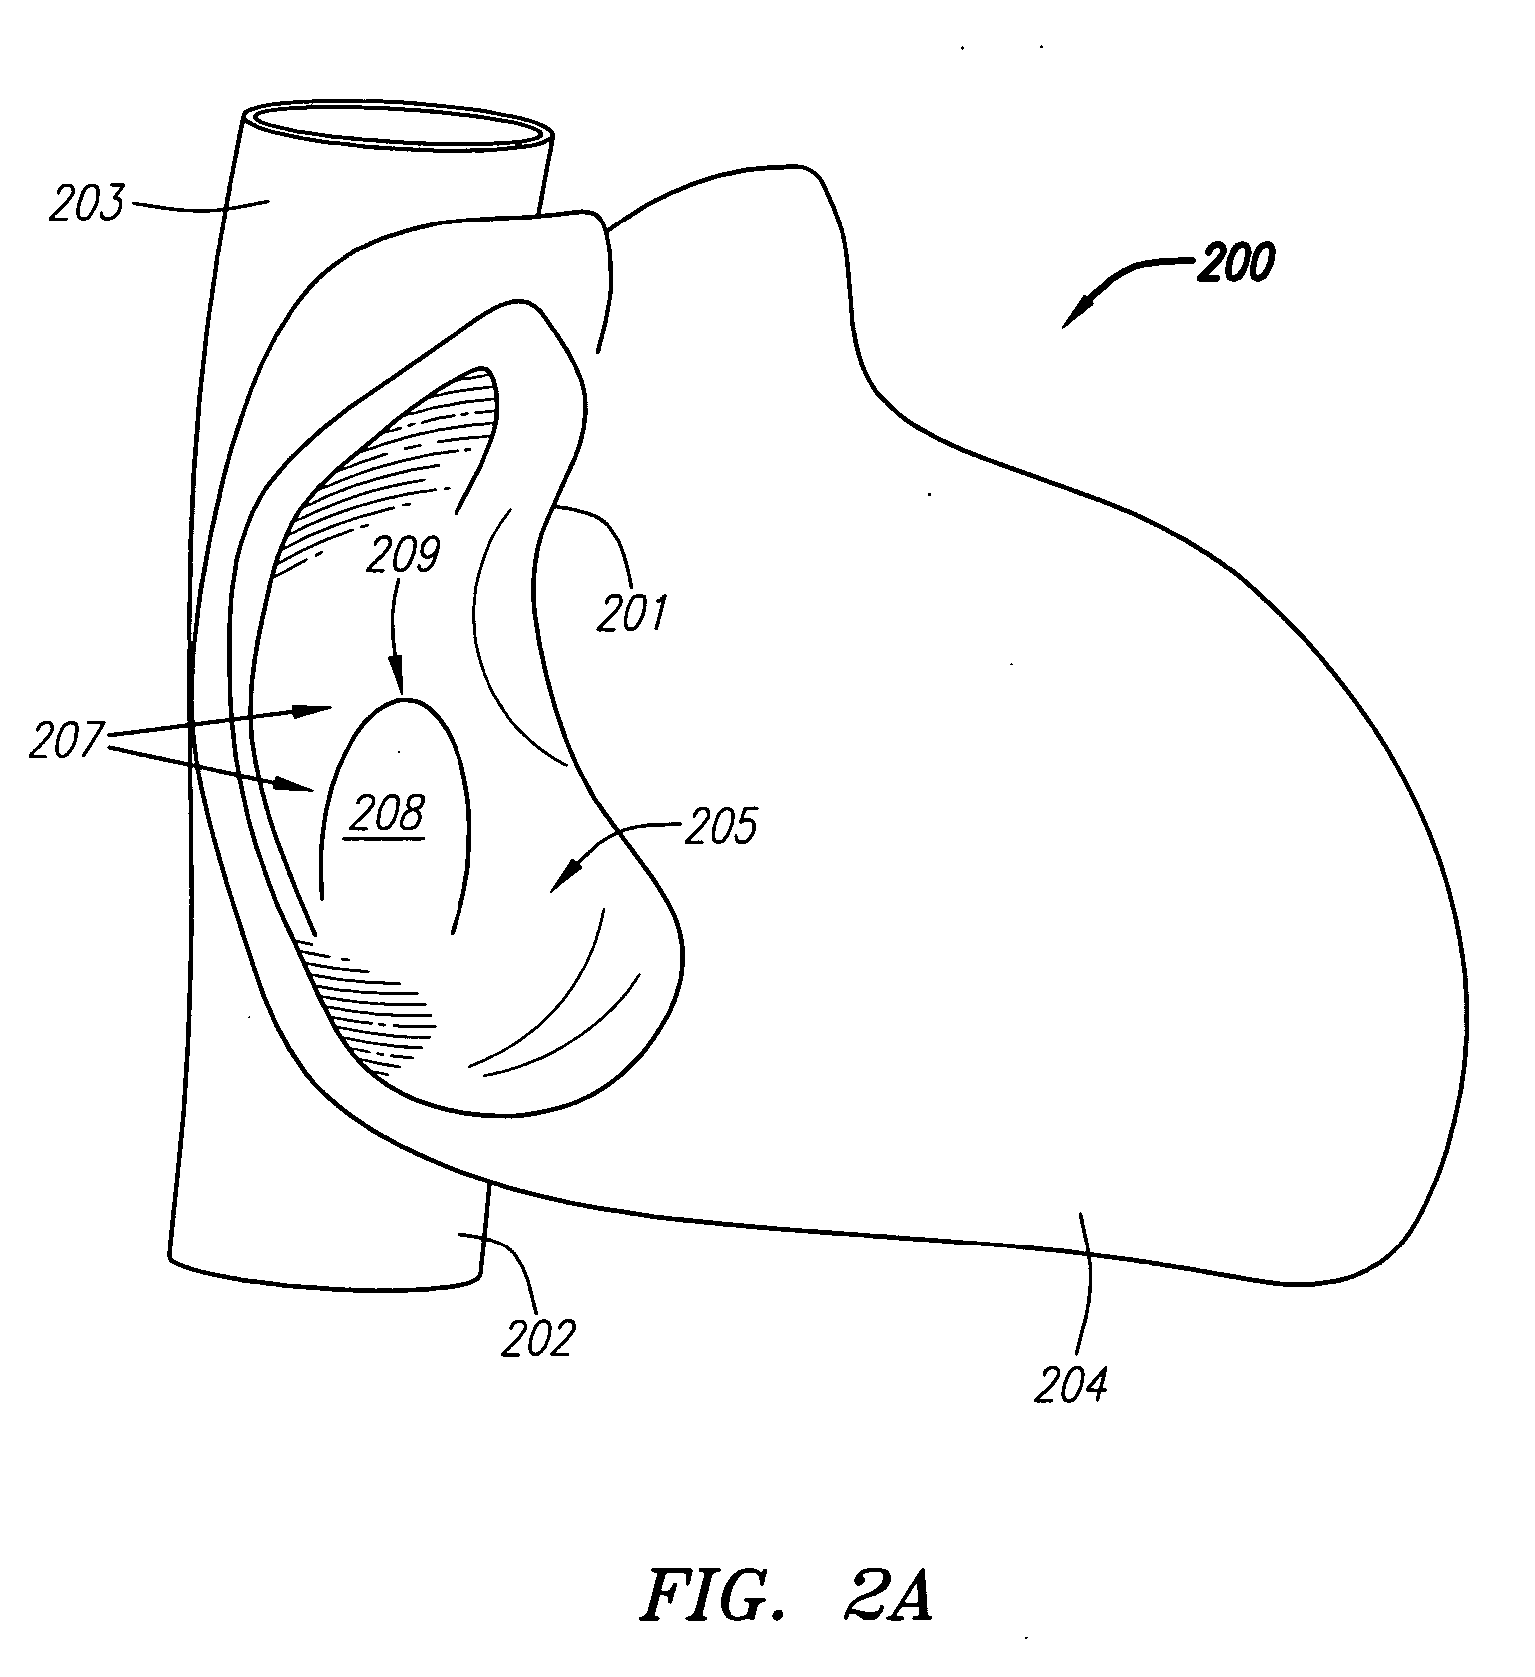 Systems and methods for treating septal defects